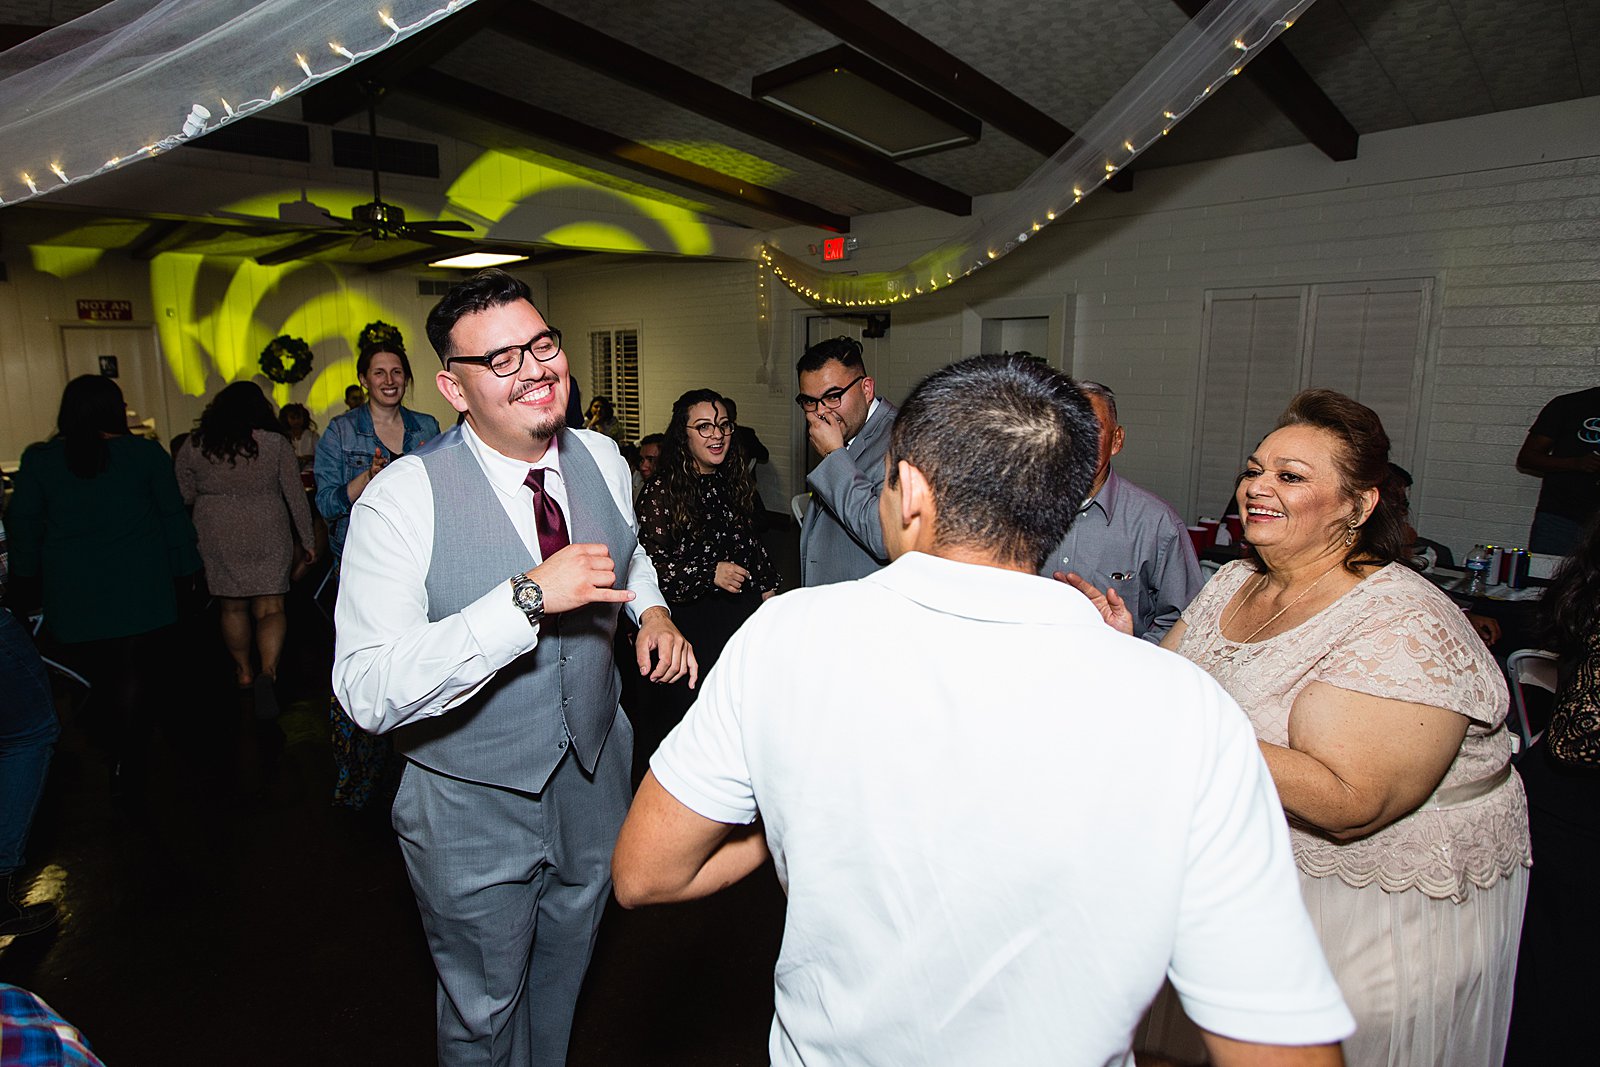 Guests dancing at Valley Garden Center wedding reception by Phoenix wedding photographer PMA Photography